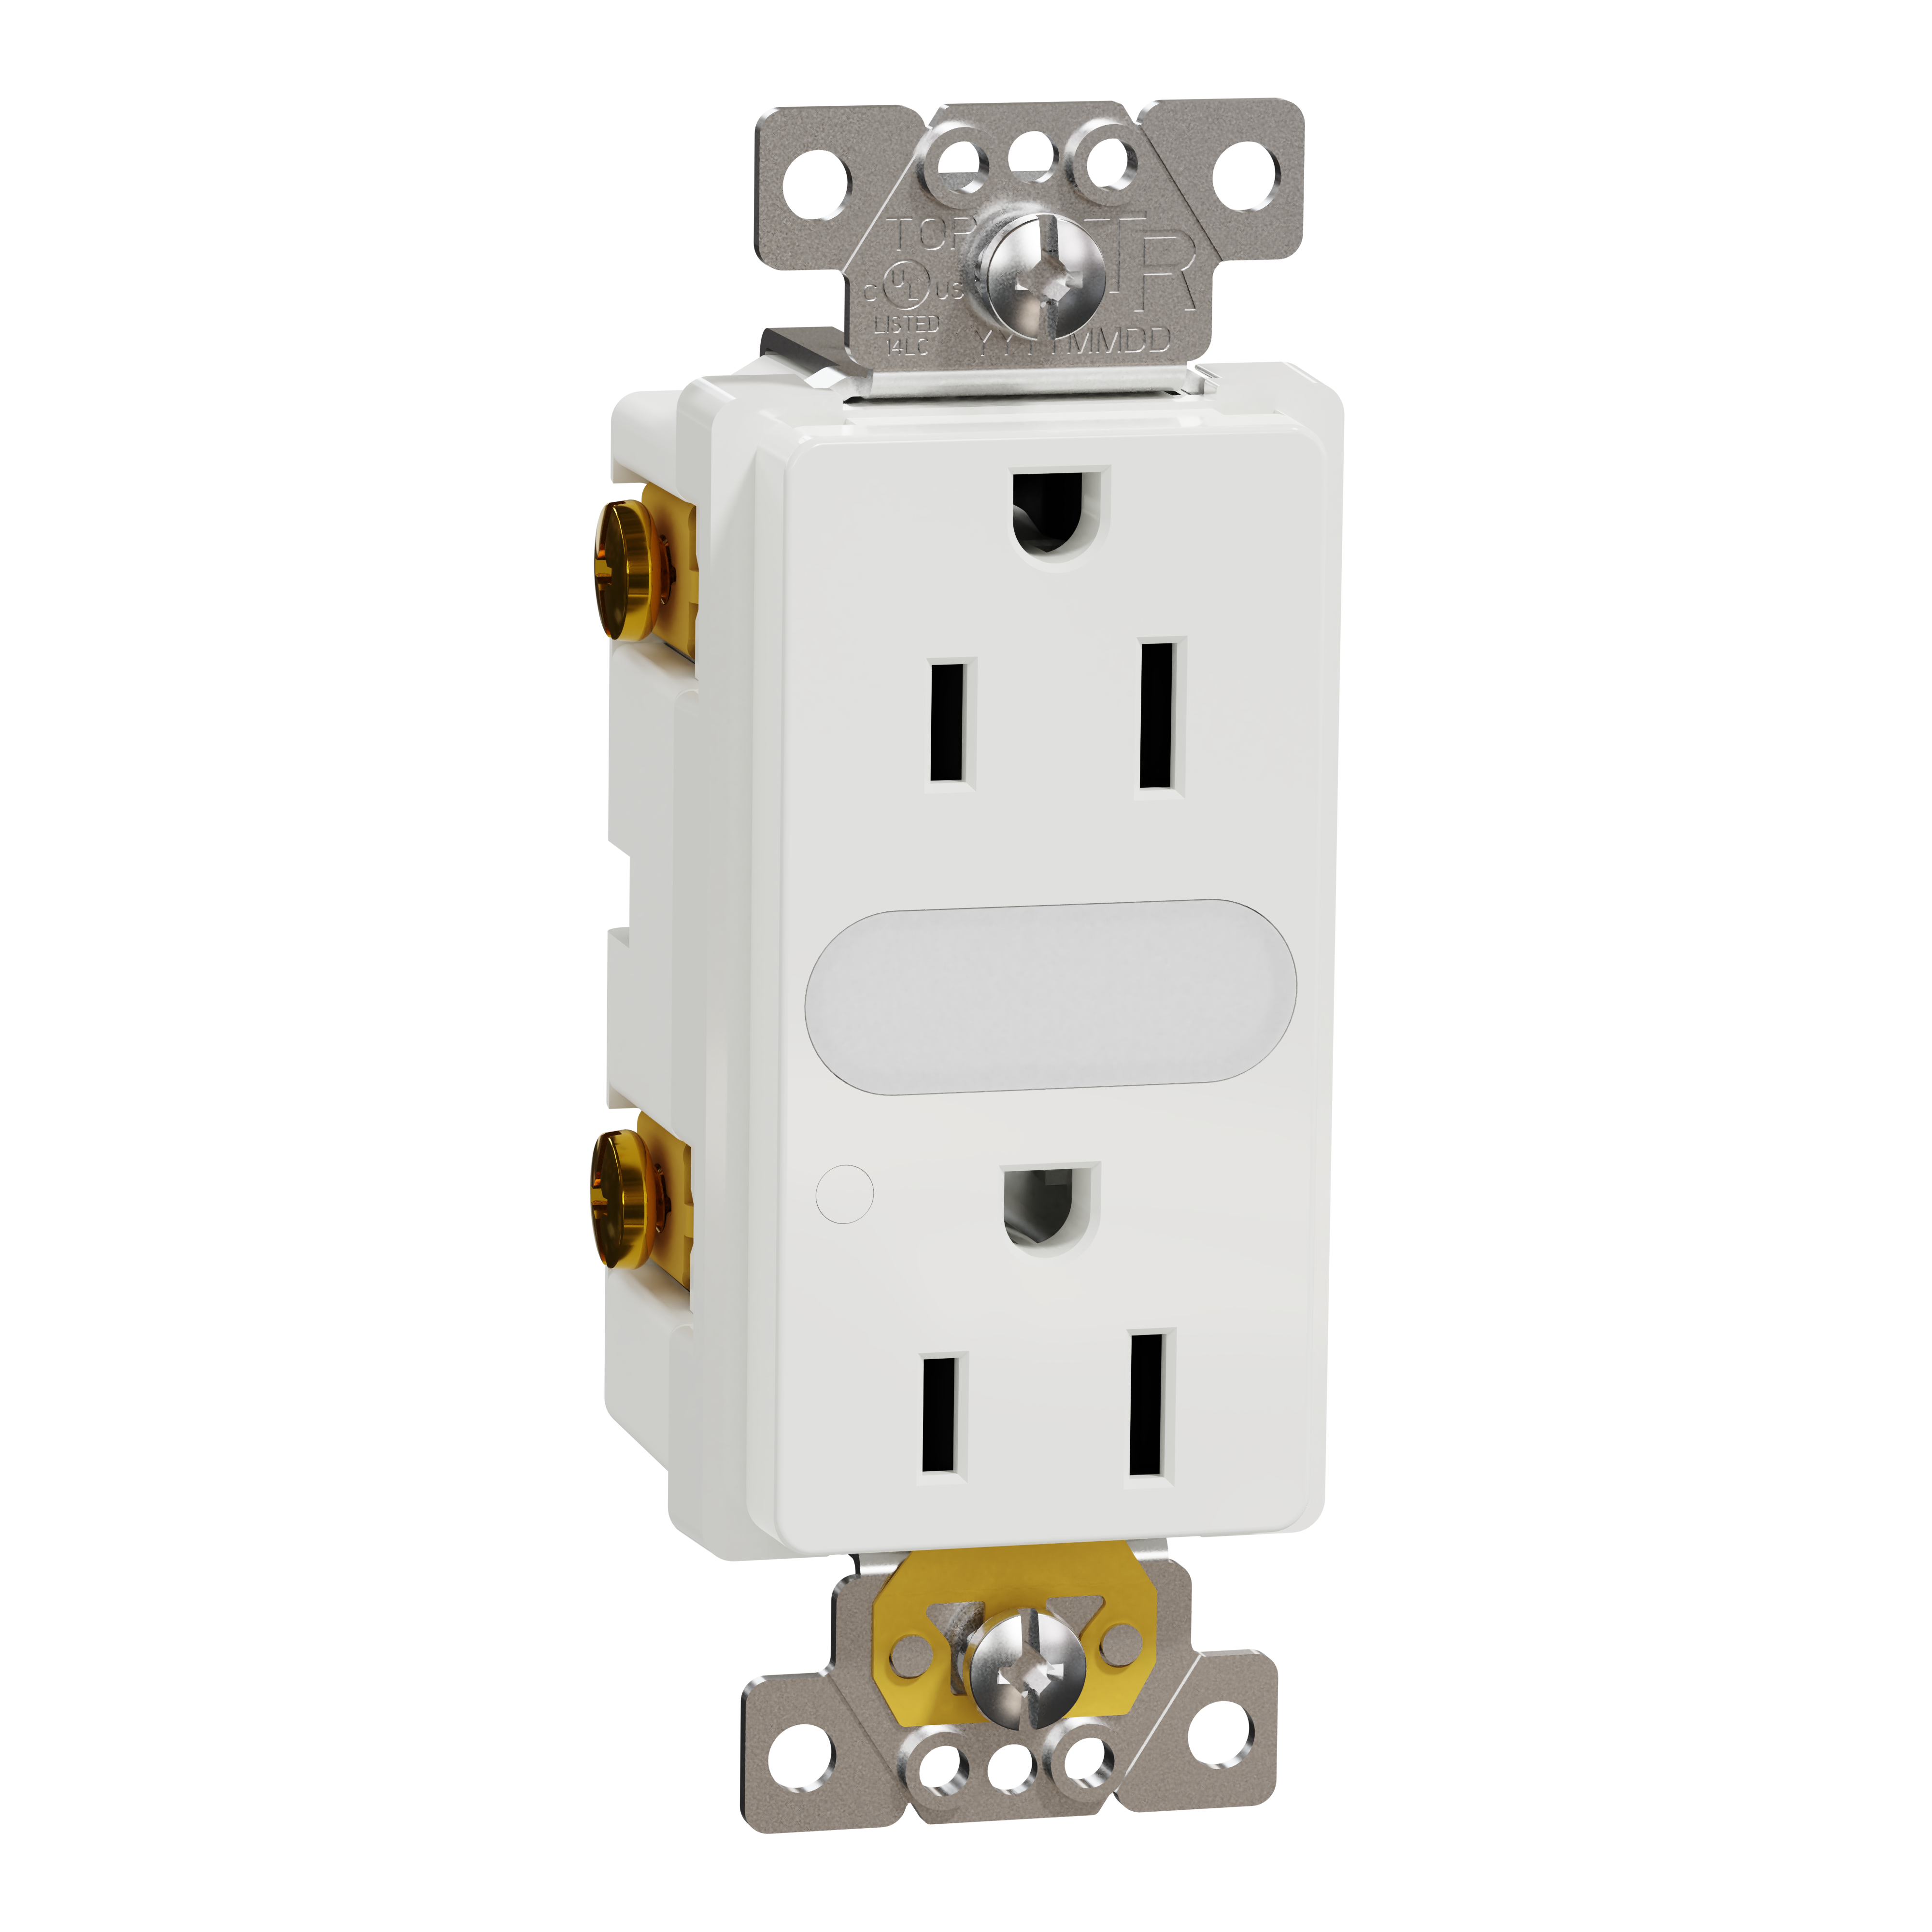 Socket-outlet, X Series, 15A, decorator, tamper resistant, lighted, residential, white, matte finish